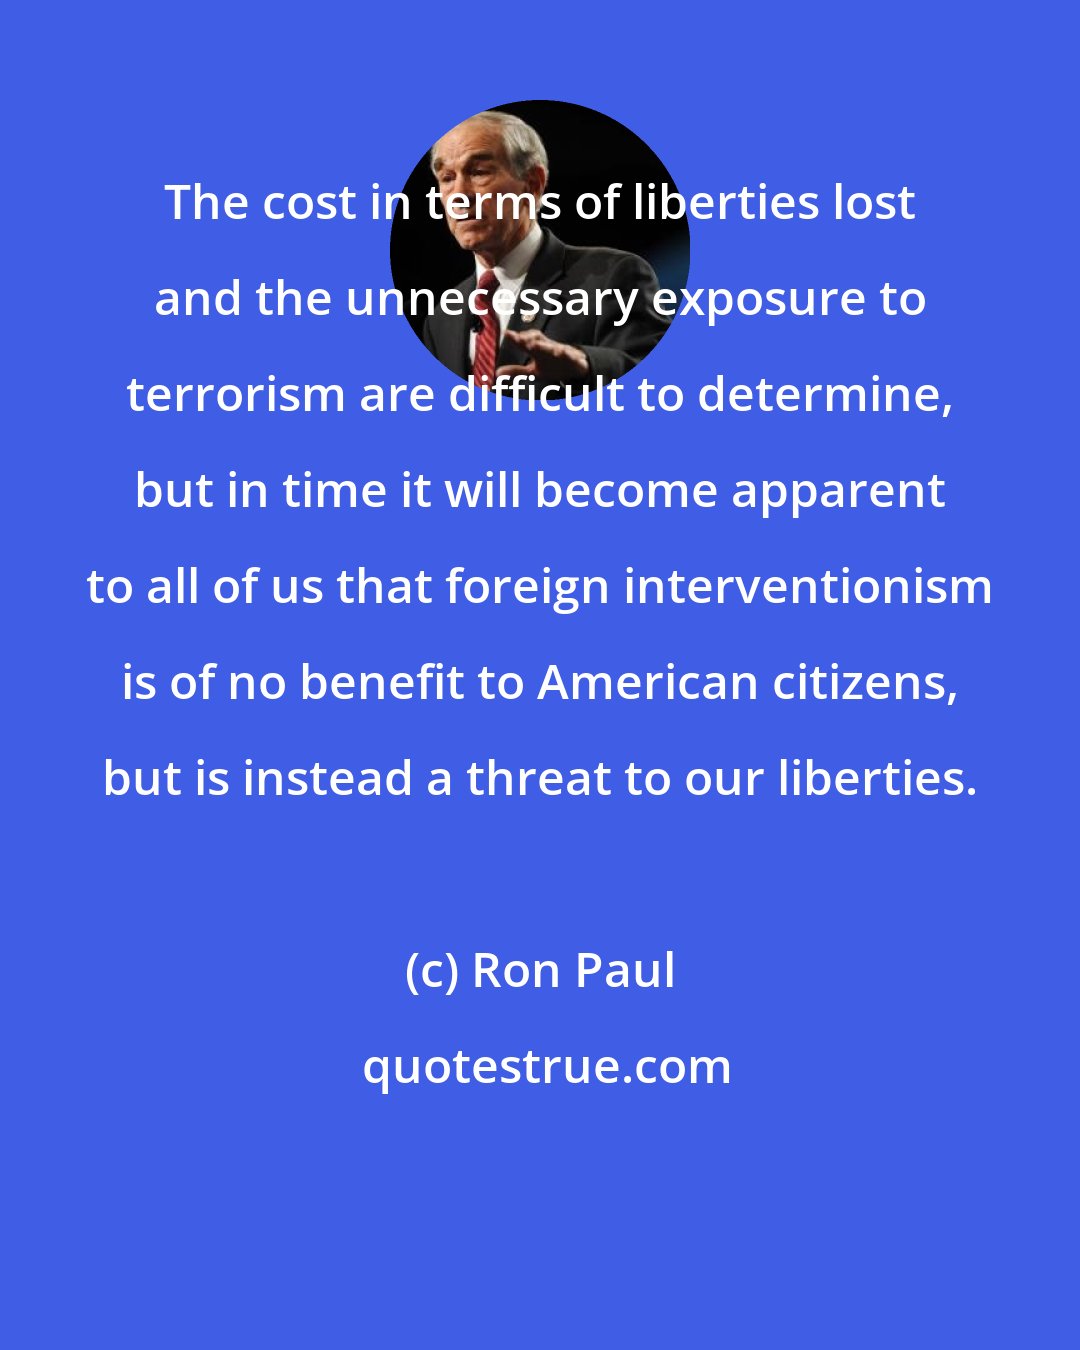 Ron Paul: The cost in terms of liberties lost and the unnecessary exposure to terrorism are difficult to determine, but in time it will become apparent to all of us that foreign interventionism is of no benefit to American citizens, but is instead a threat to our liberties.